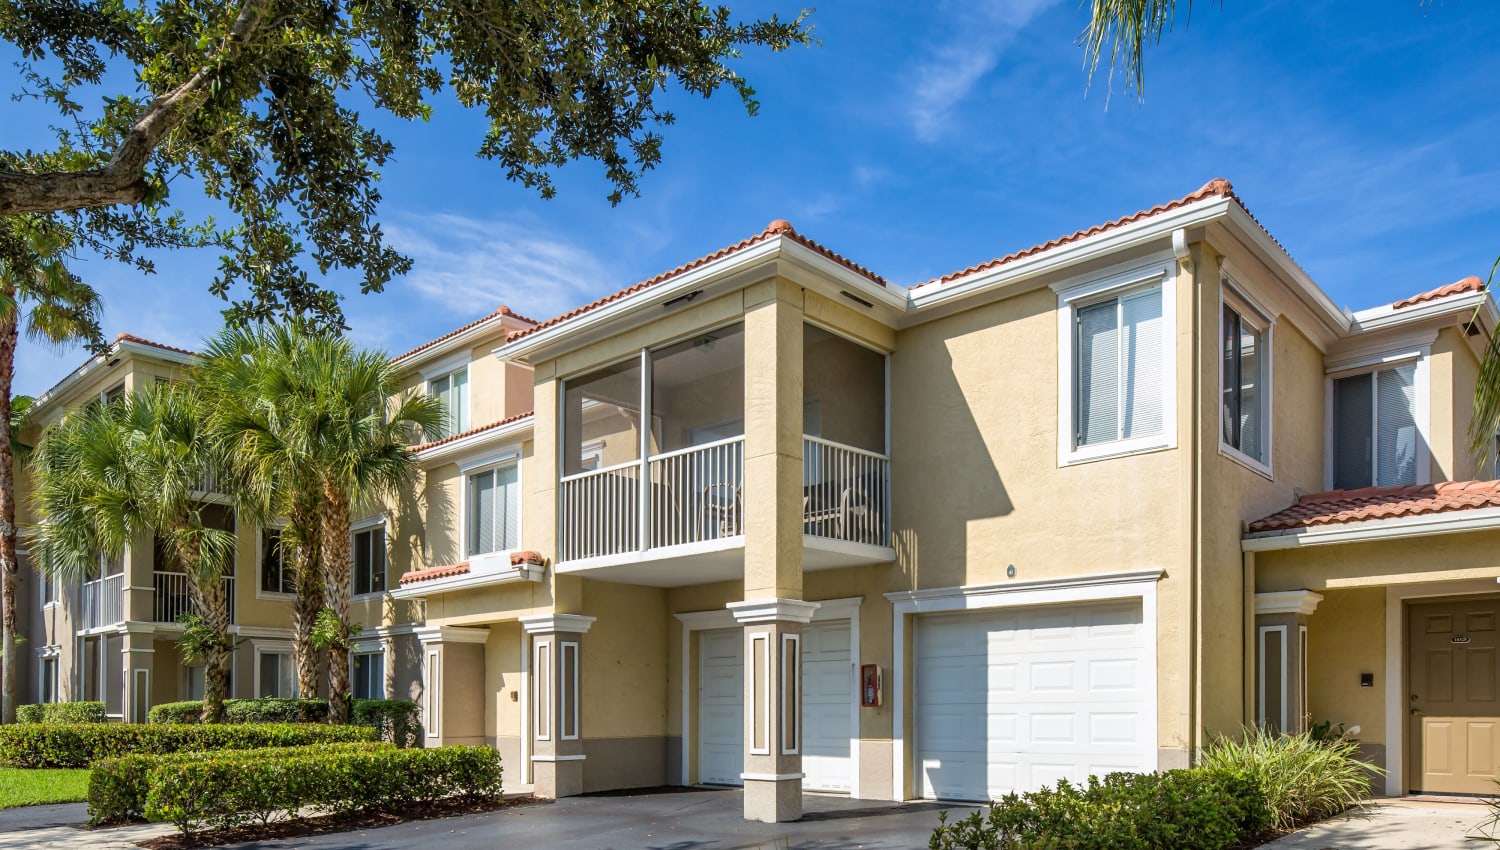 Exterior view of Ibis Reserve Apartments in West Palm Beach, Florida